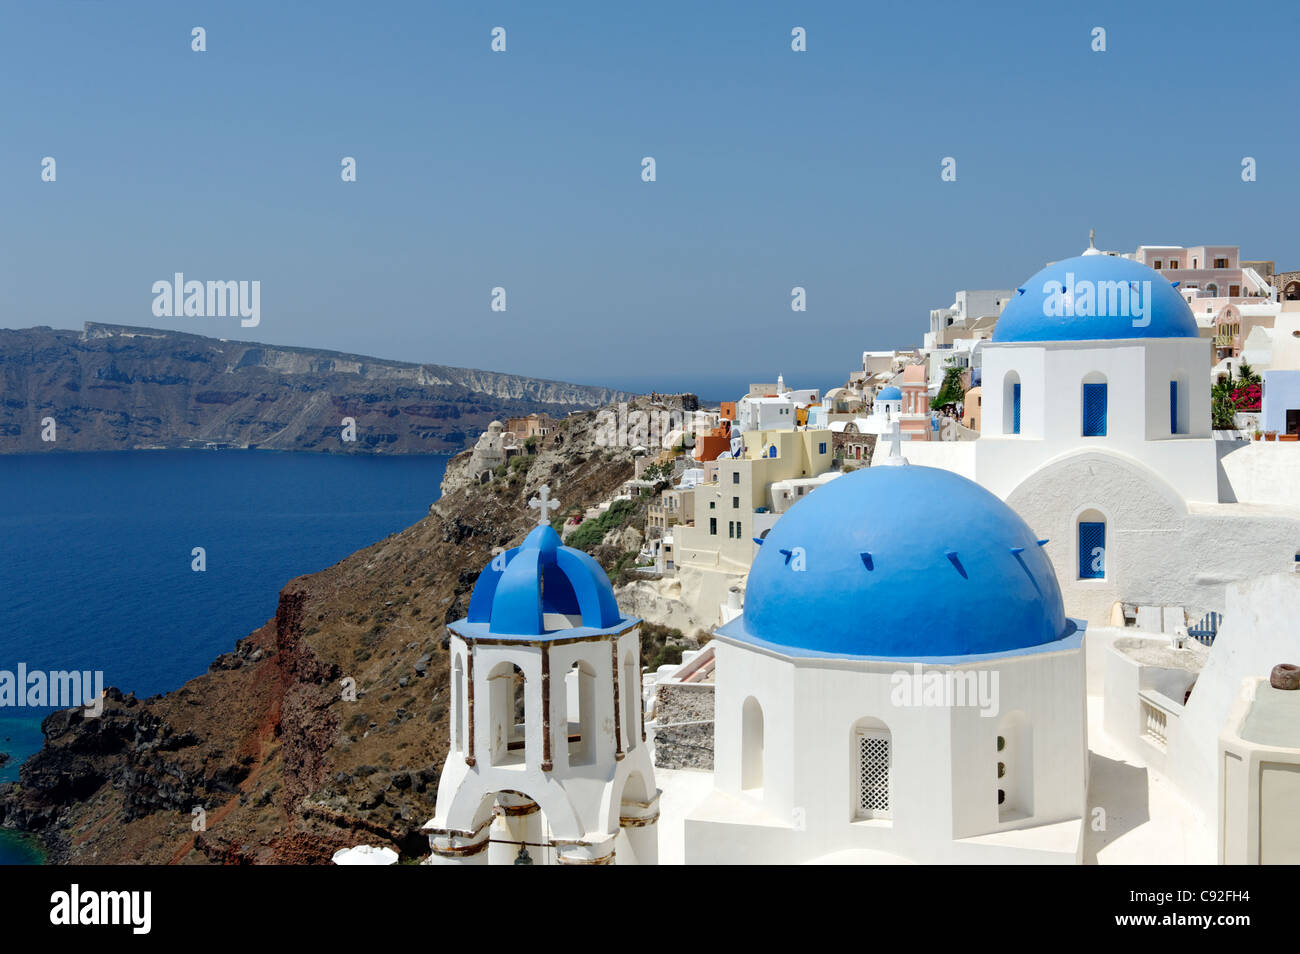 View of the picture postcard village of Oia which is a romantic mix of blue domed churches and whitewashed buildings. Santorini Stock Photo